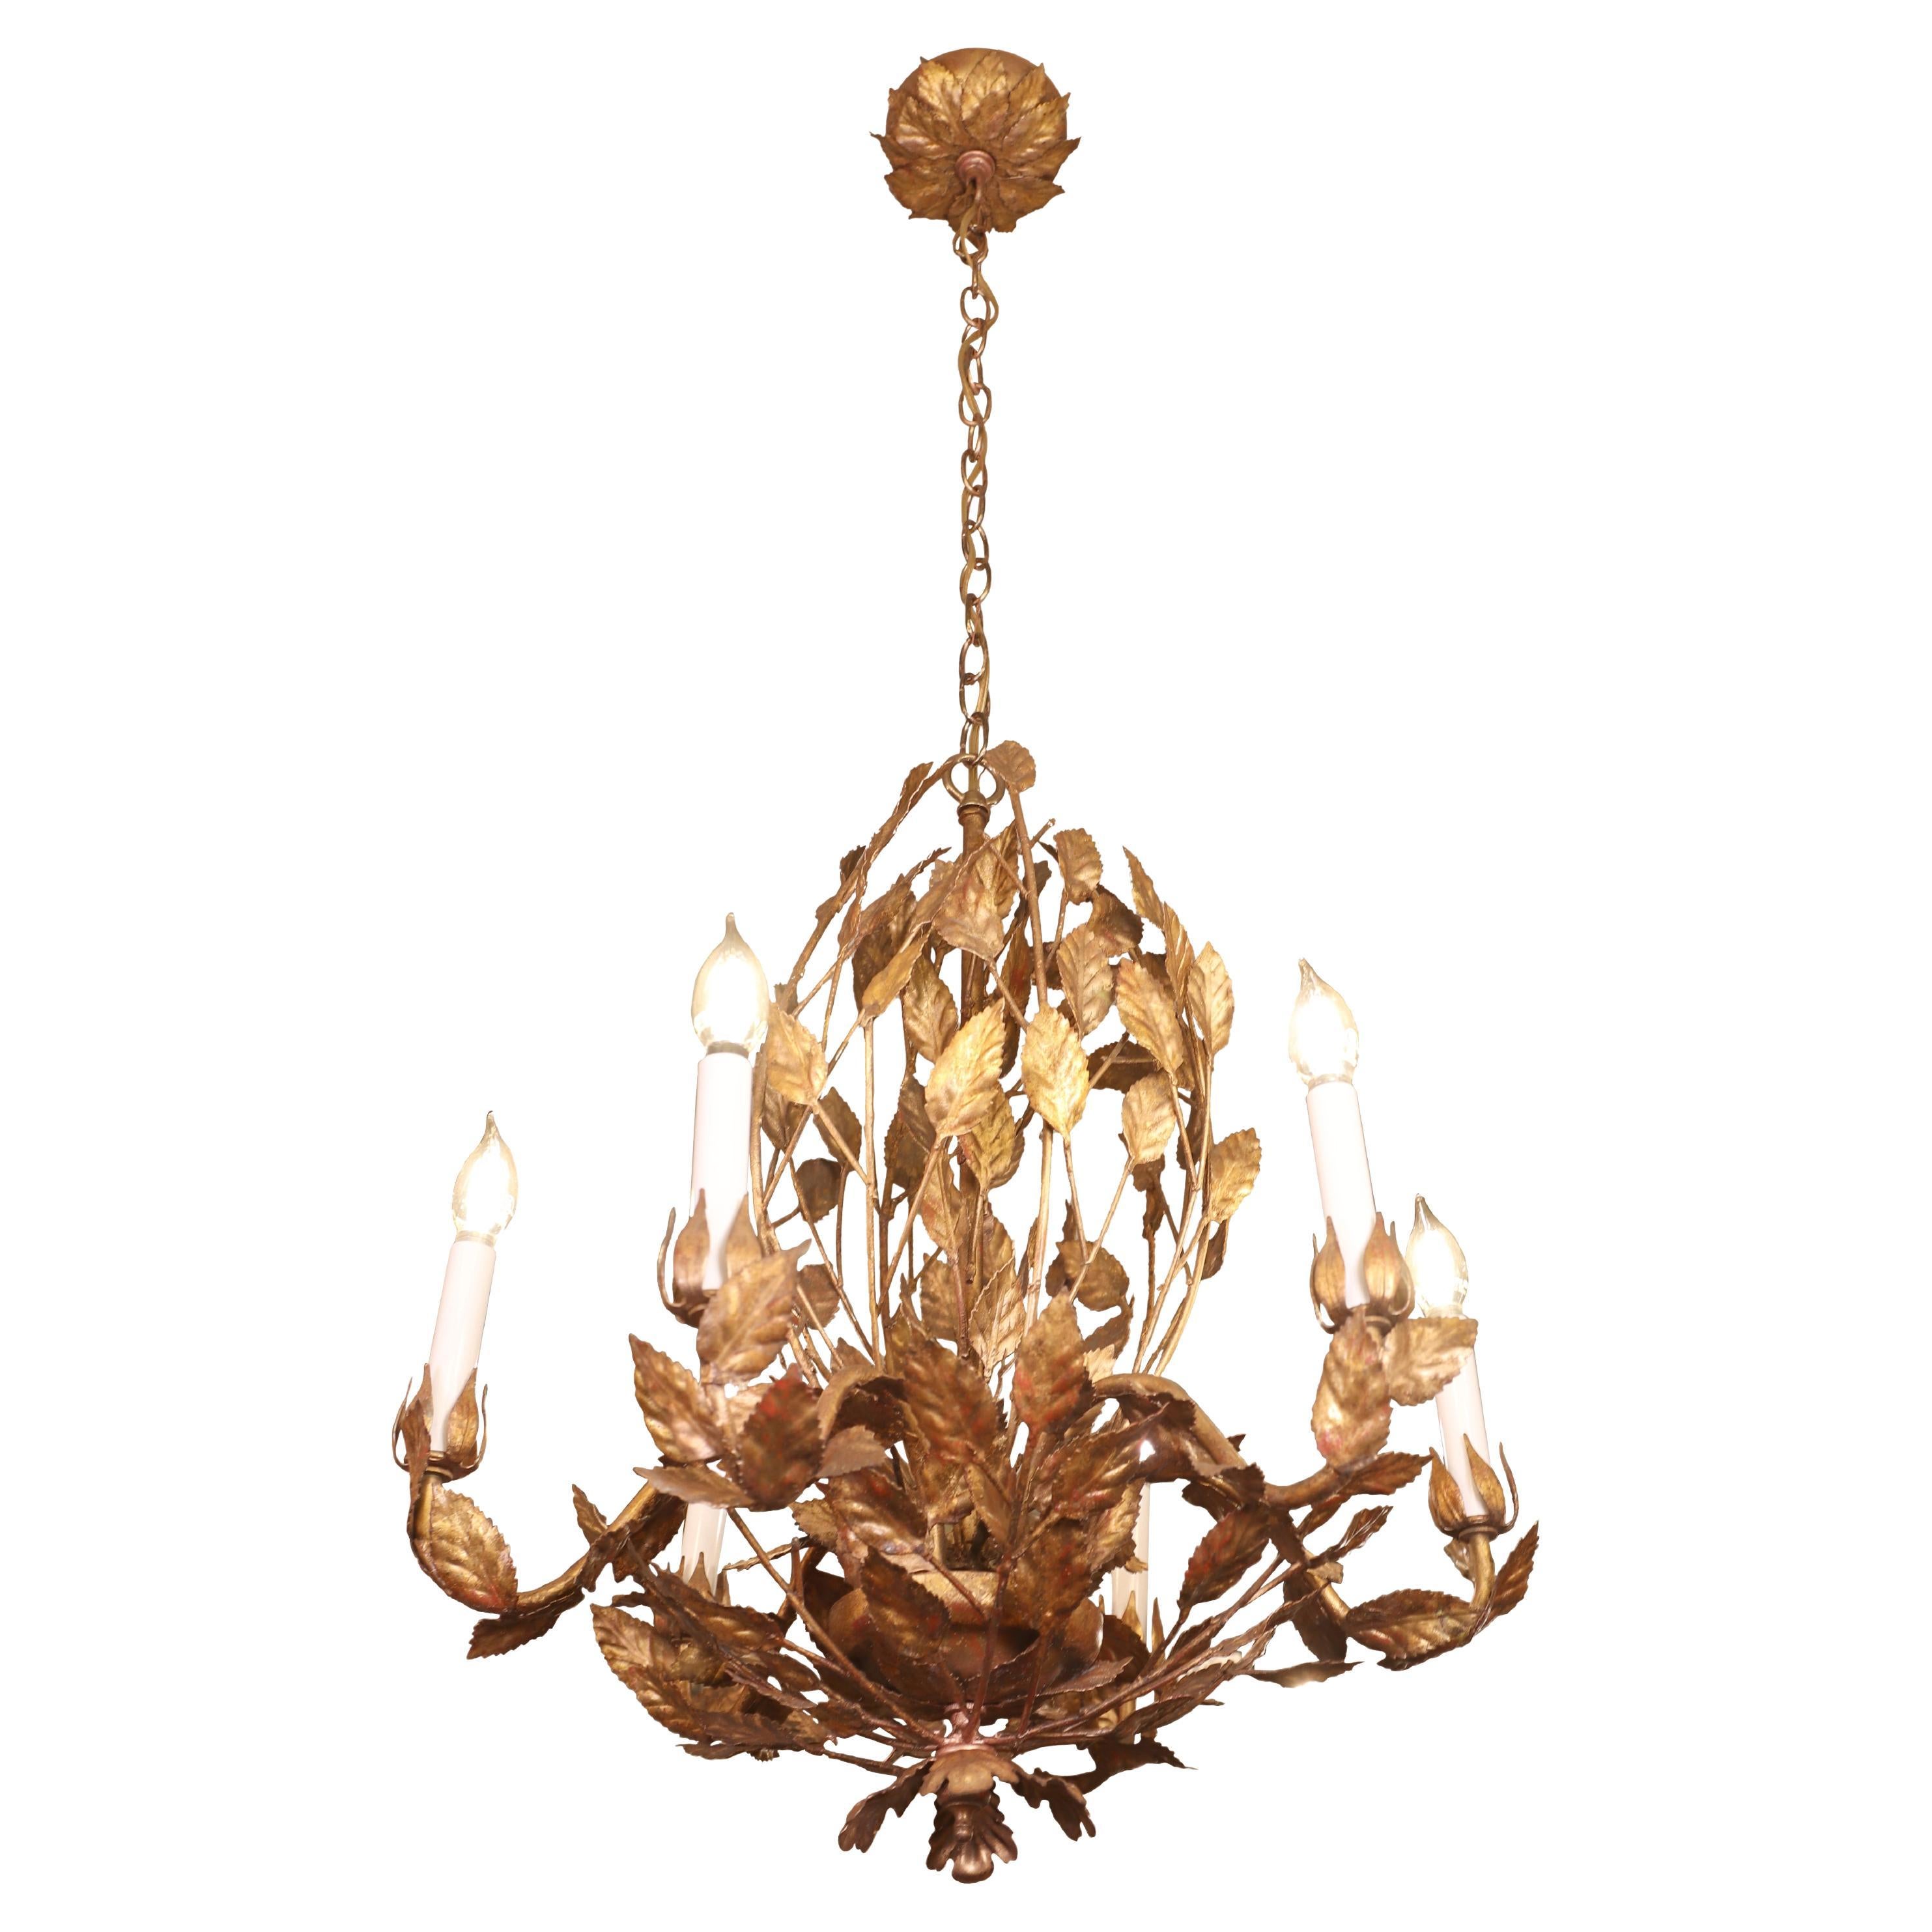 Restored Gilded Leaves 6 Light Chandelier Done in a Tole Style For Sale